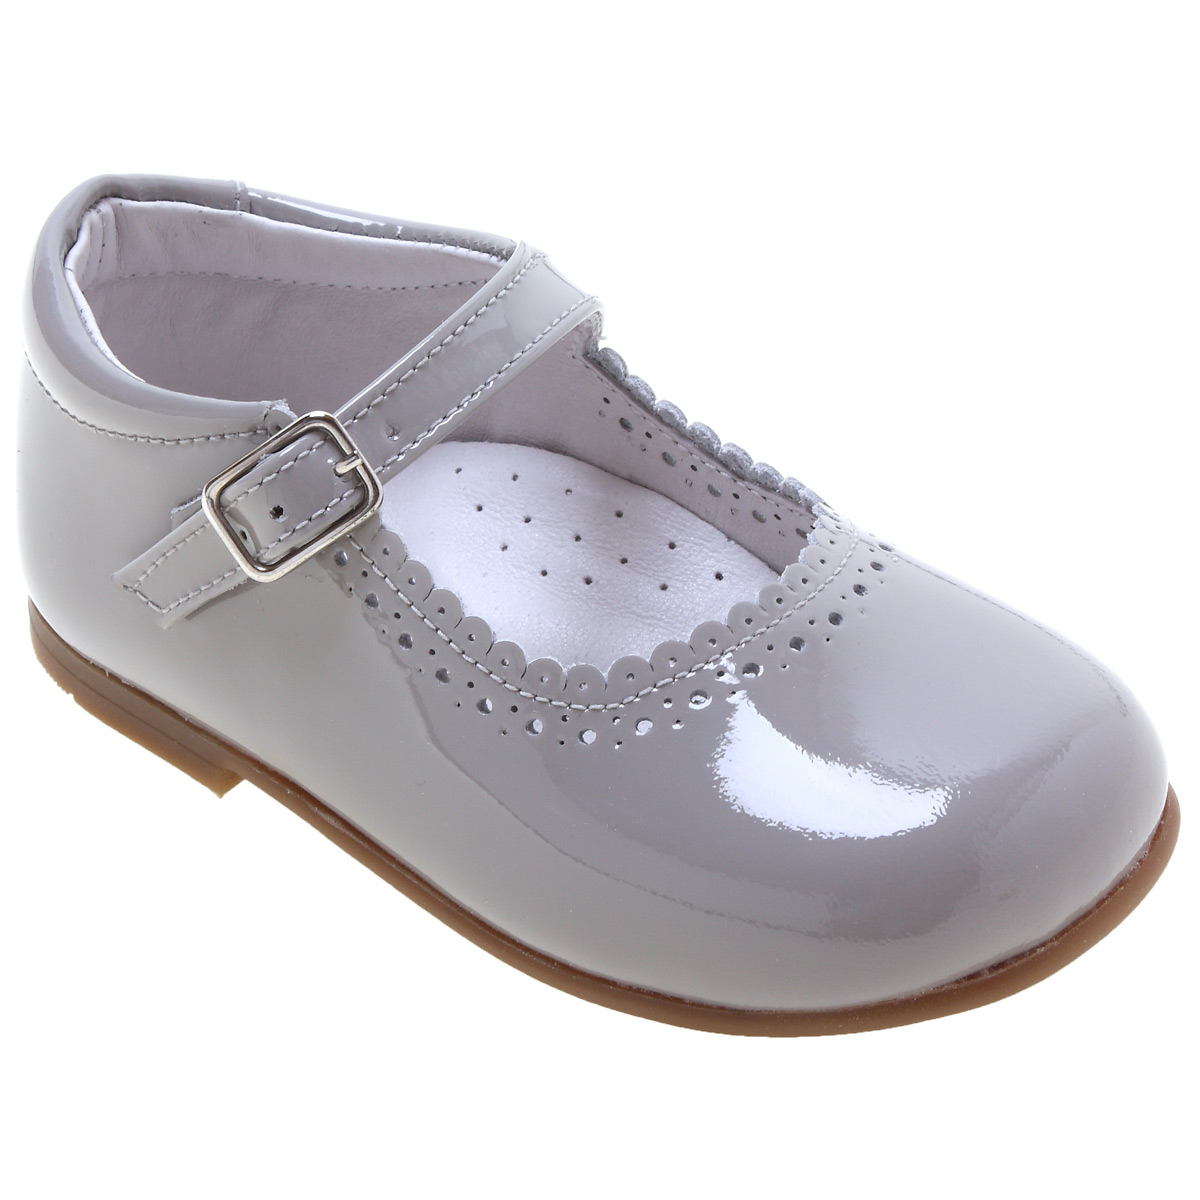 gray baby girl shoes